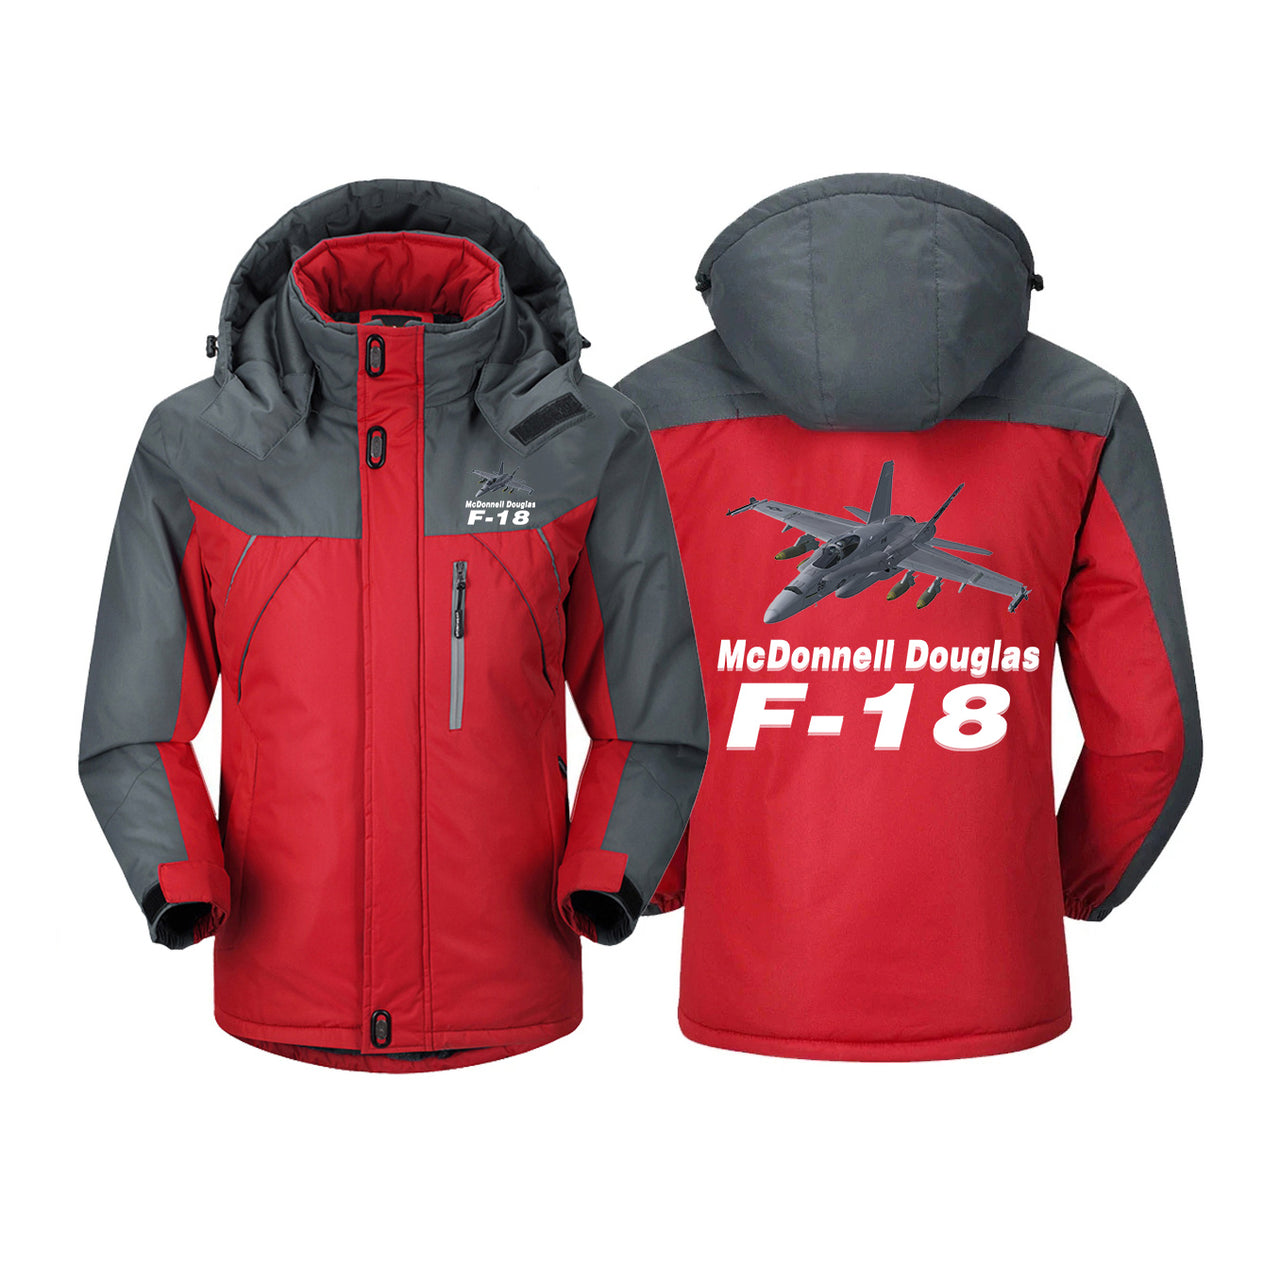 The McDonnell Douglas F18 Designed Thick Winter Jackets